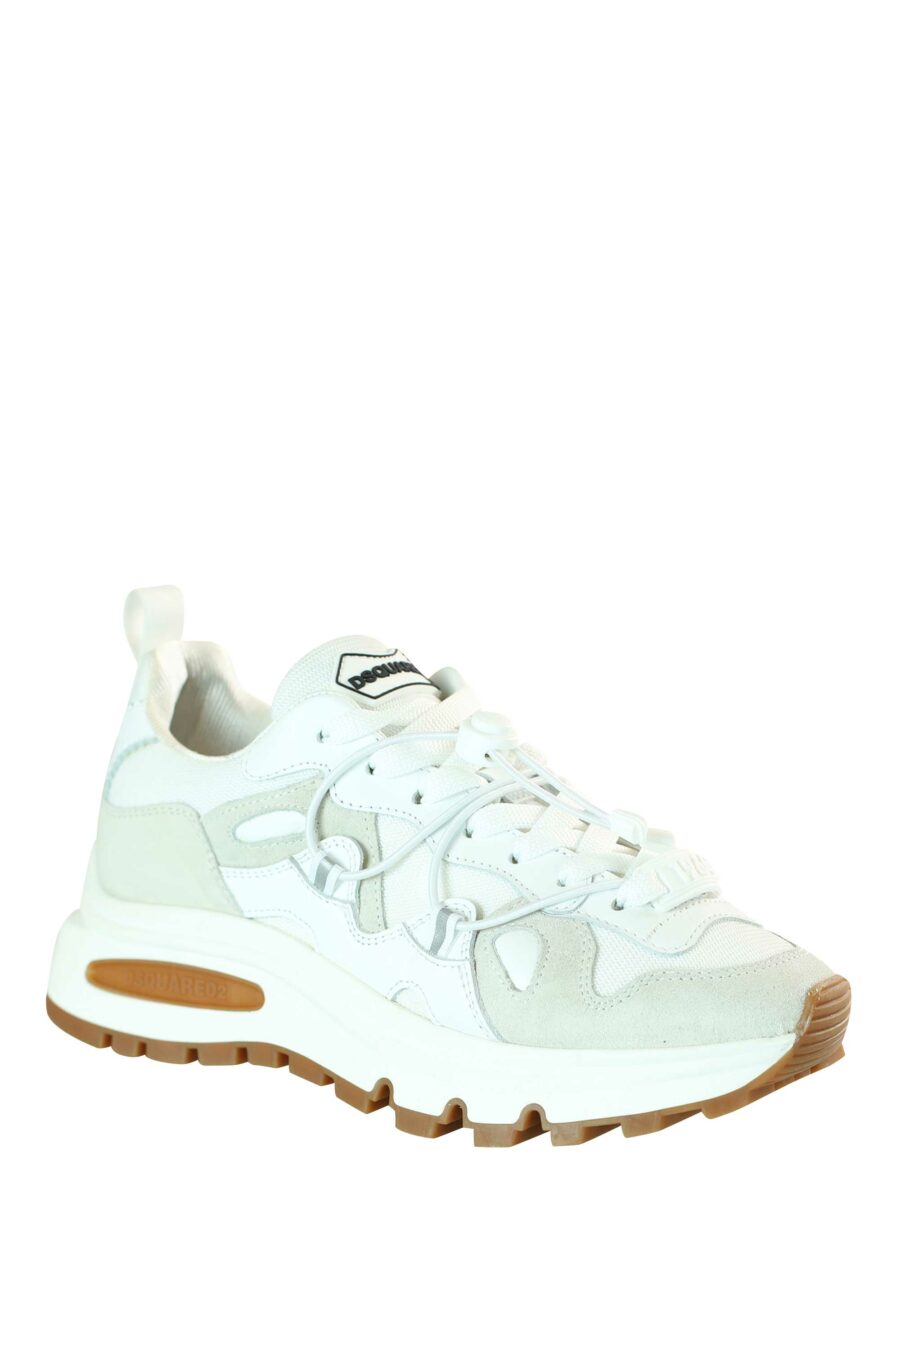 White mix trainers with white platform and brown sole - 8055777195864 2